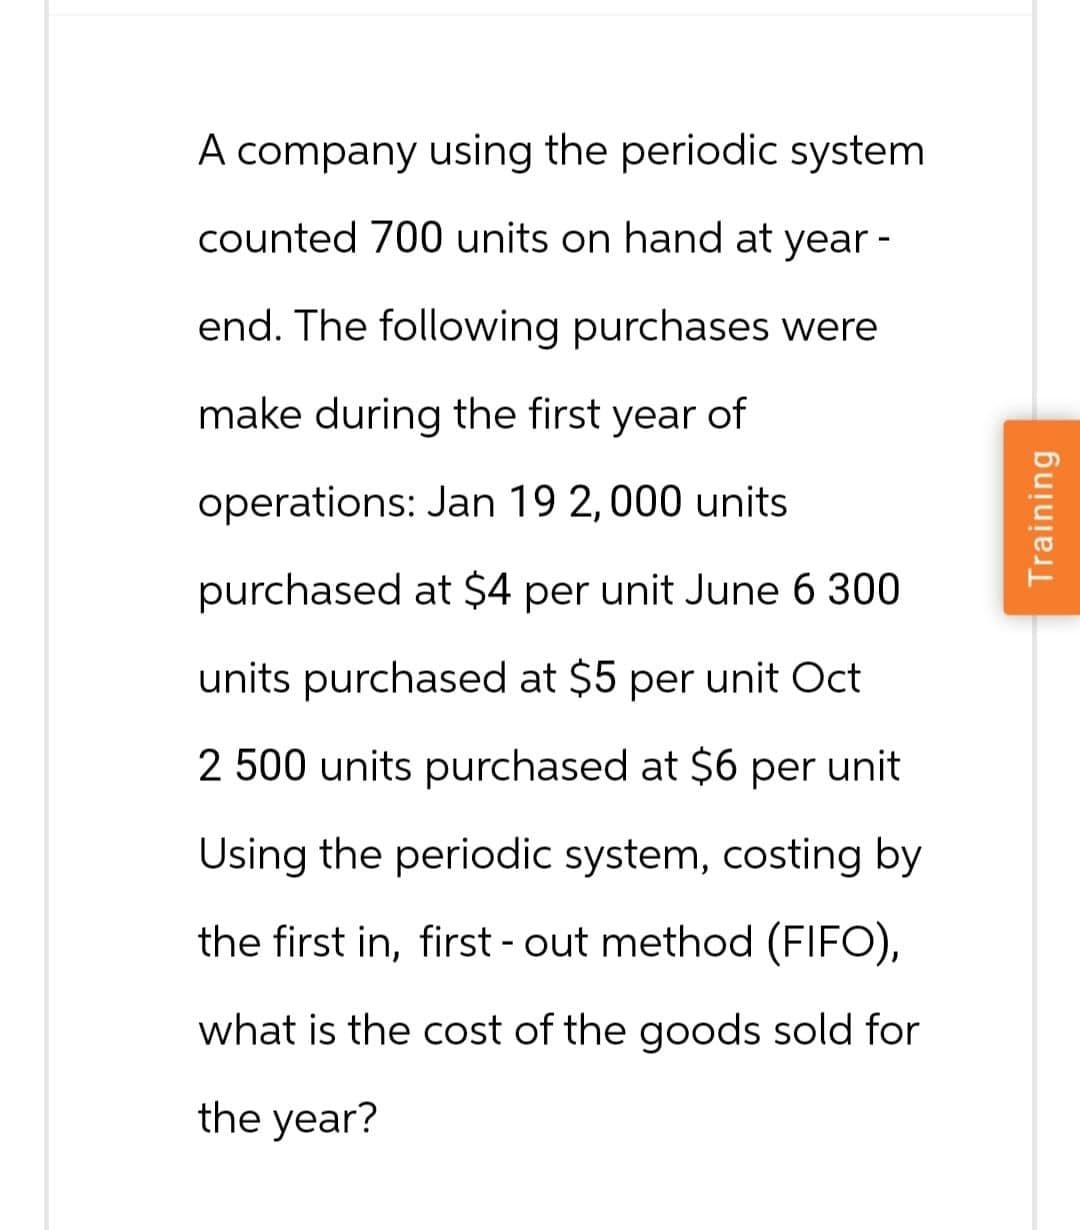 A company using the periodic system
counted 700 units on hand at year -
end. The following purchases were
make during the first year of
operations: Jan 19 2,000 units.
purchased at $4 per unit June 6 300
units purchased at $5 per unit Oct
2 500 units purchased at $6 per unit
Using the periodic system, costing by
the first in, first-out method (FIFO),
what is the cost of the goods sold for
the year?
Training